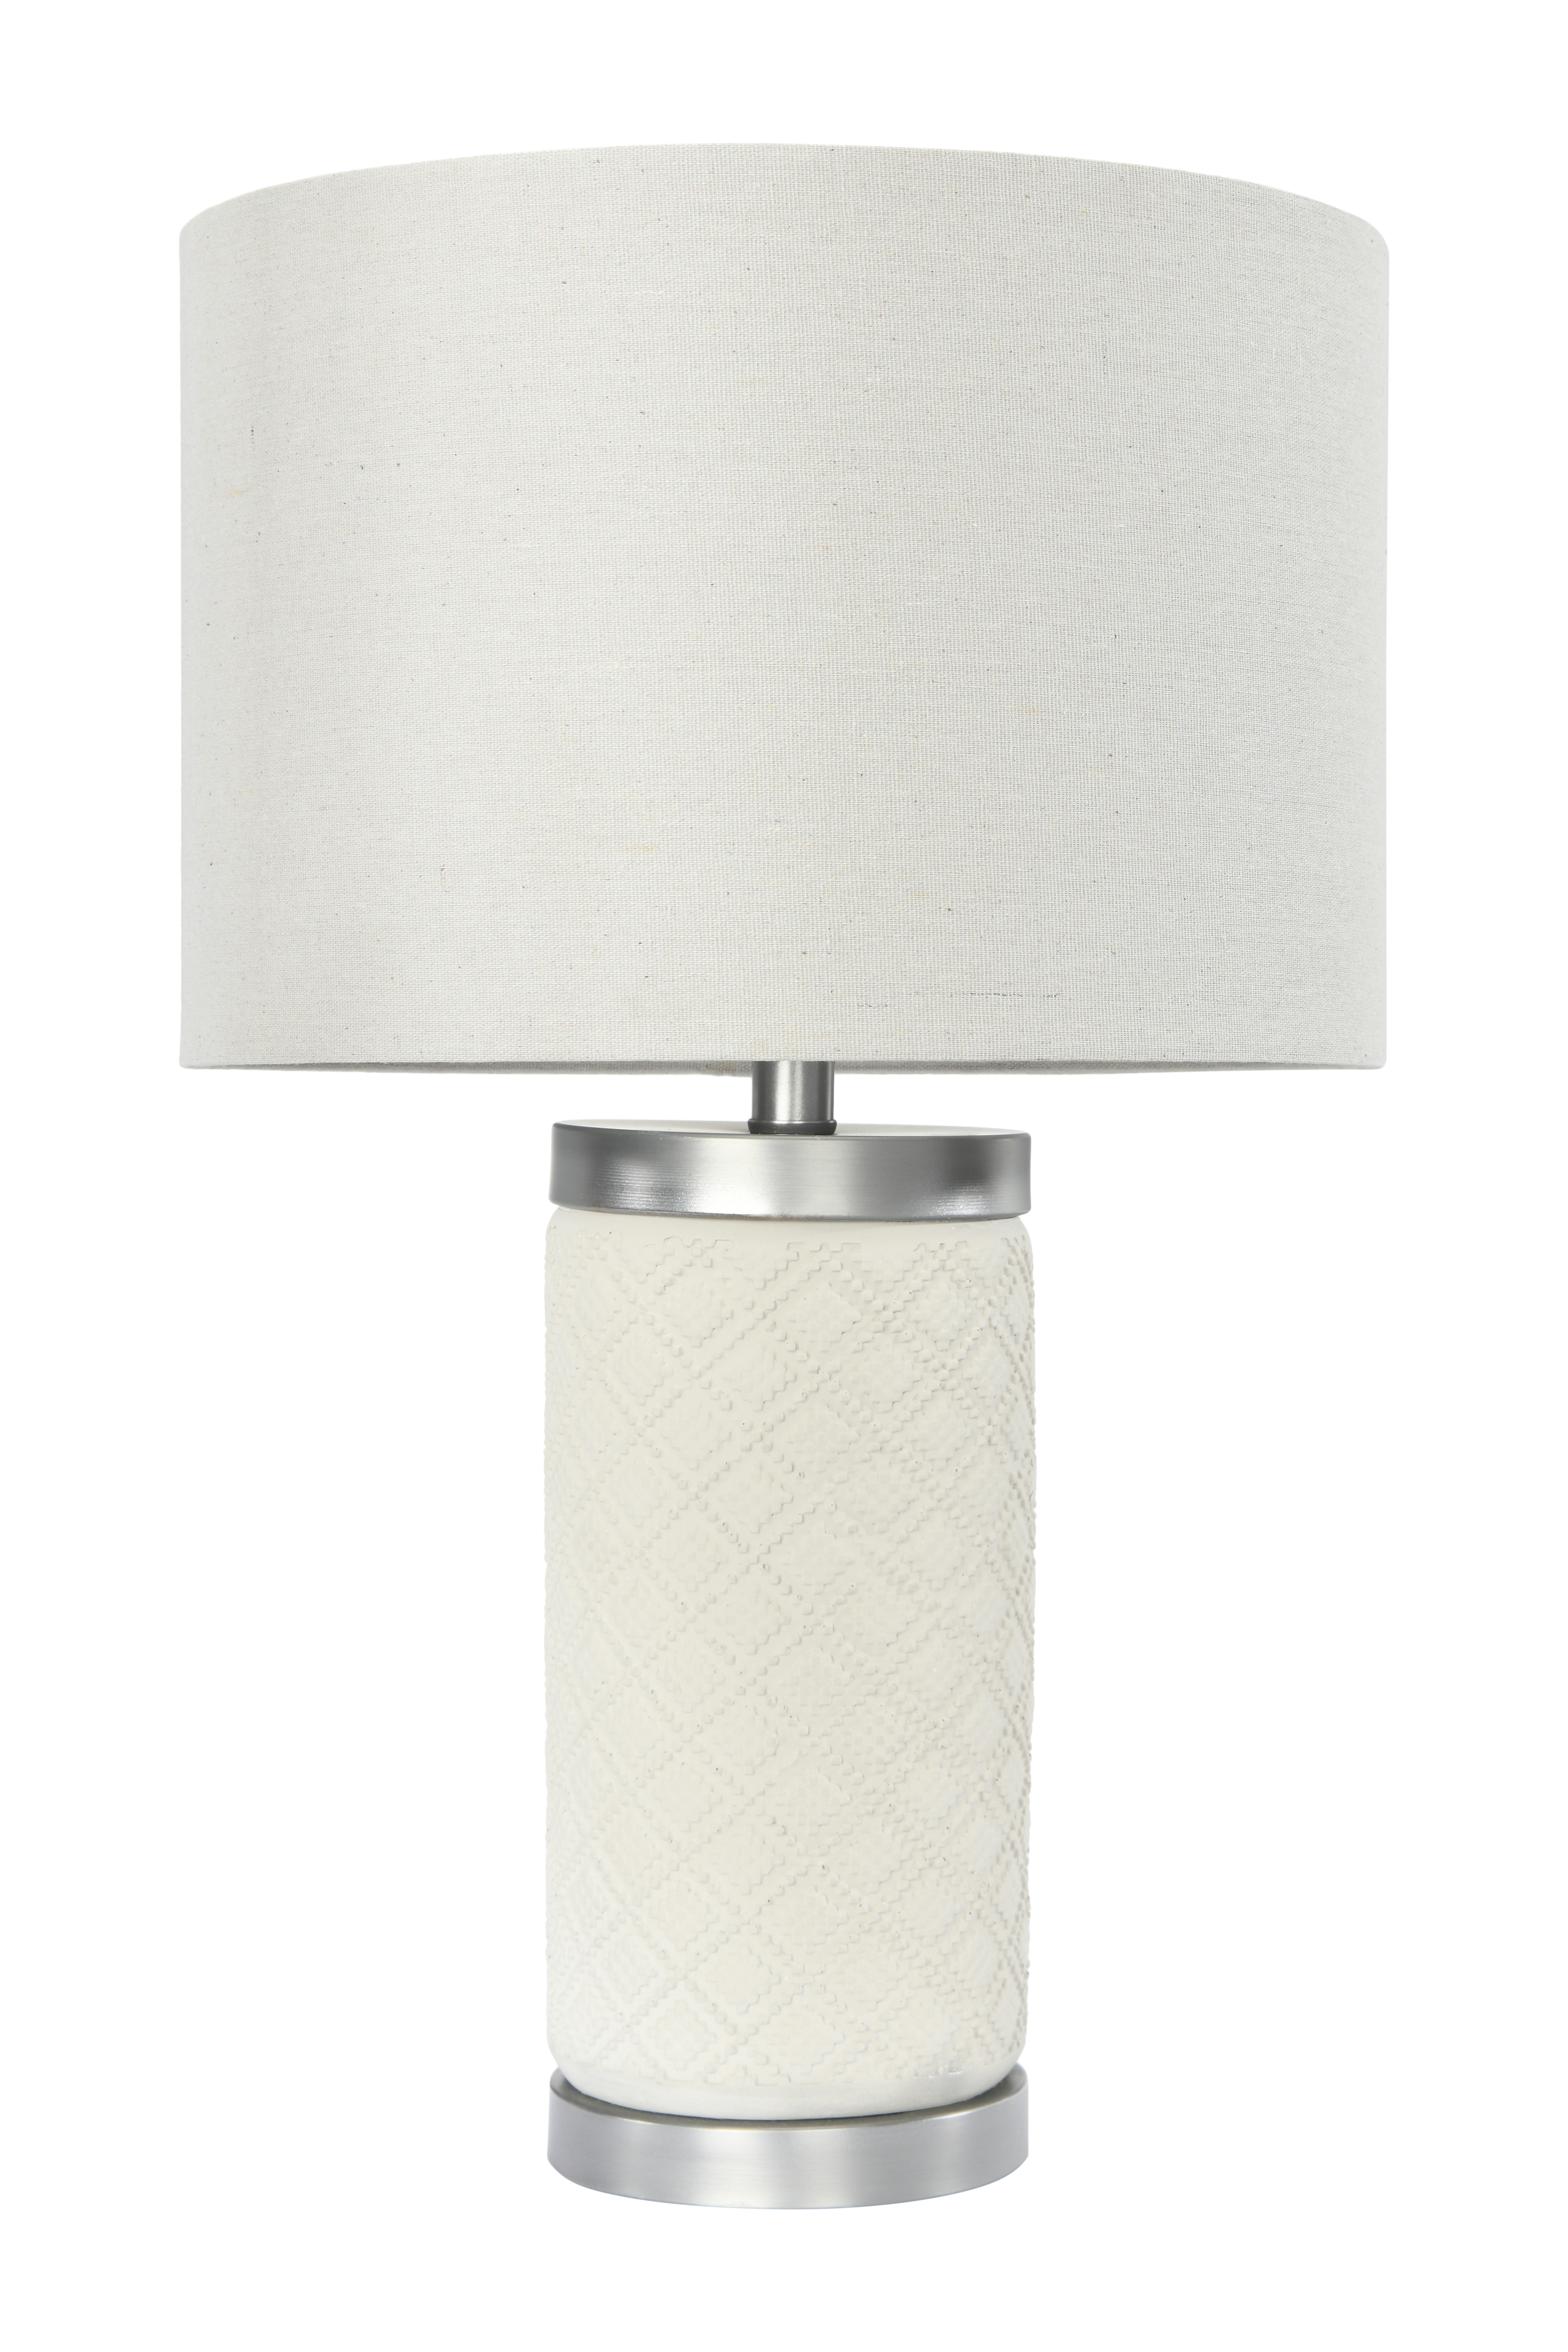 Raw Concrete Table Lamp with Imprinted Diamond Design and Metal Accents - Image 0